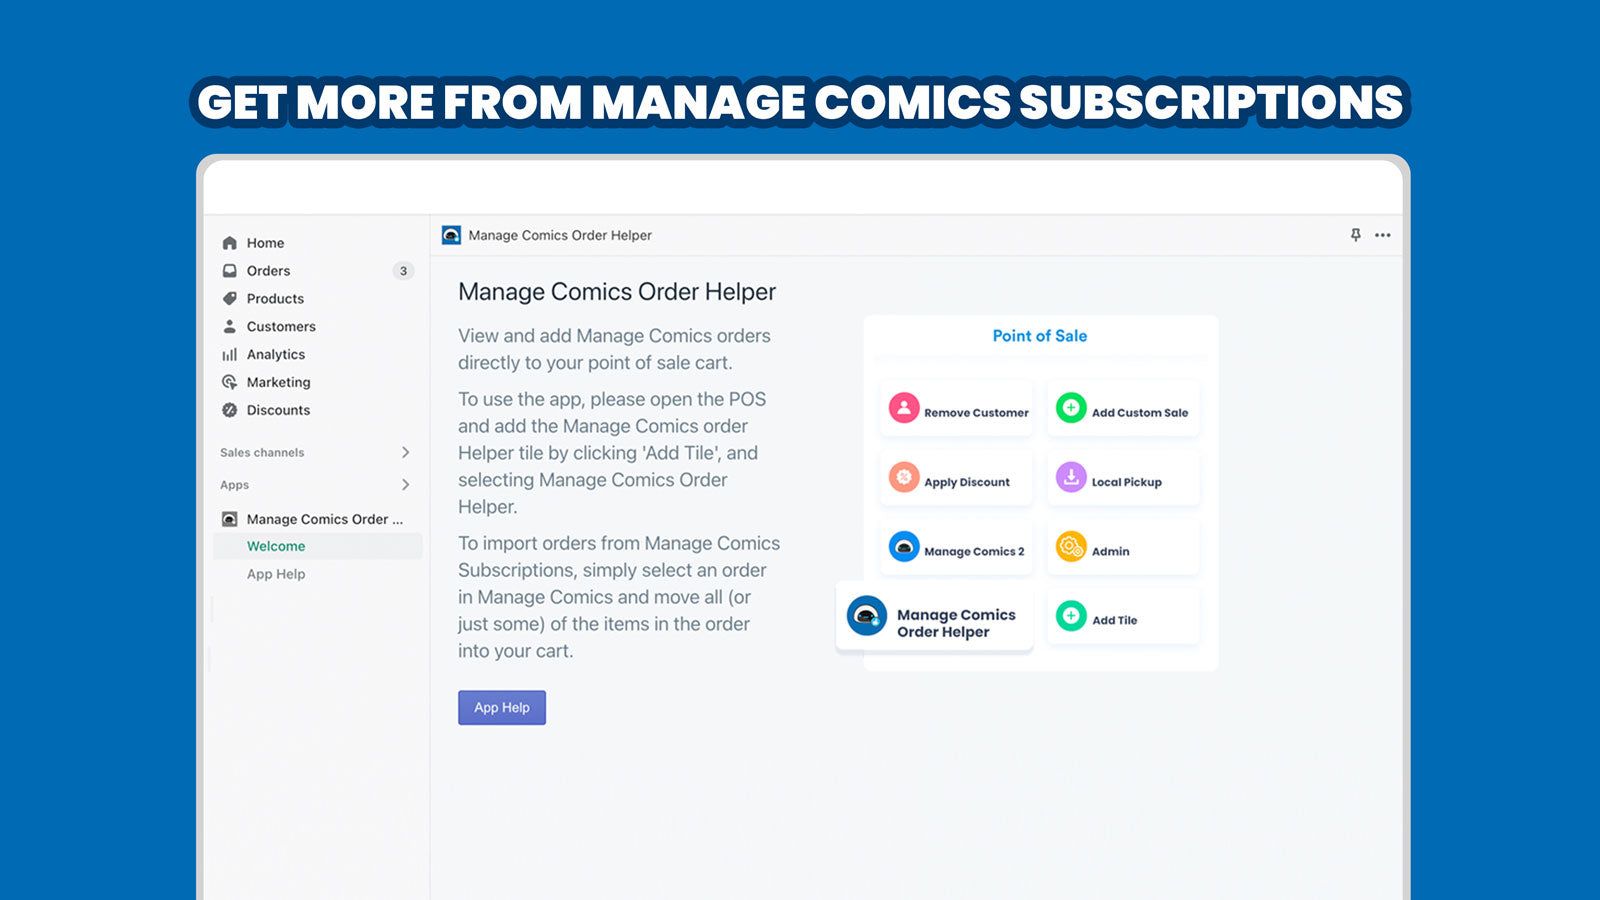 Get more from Manage Comics Subscriptions.